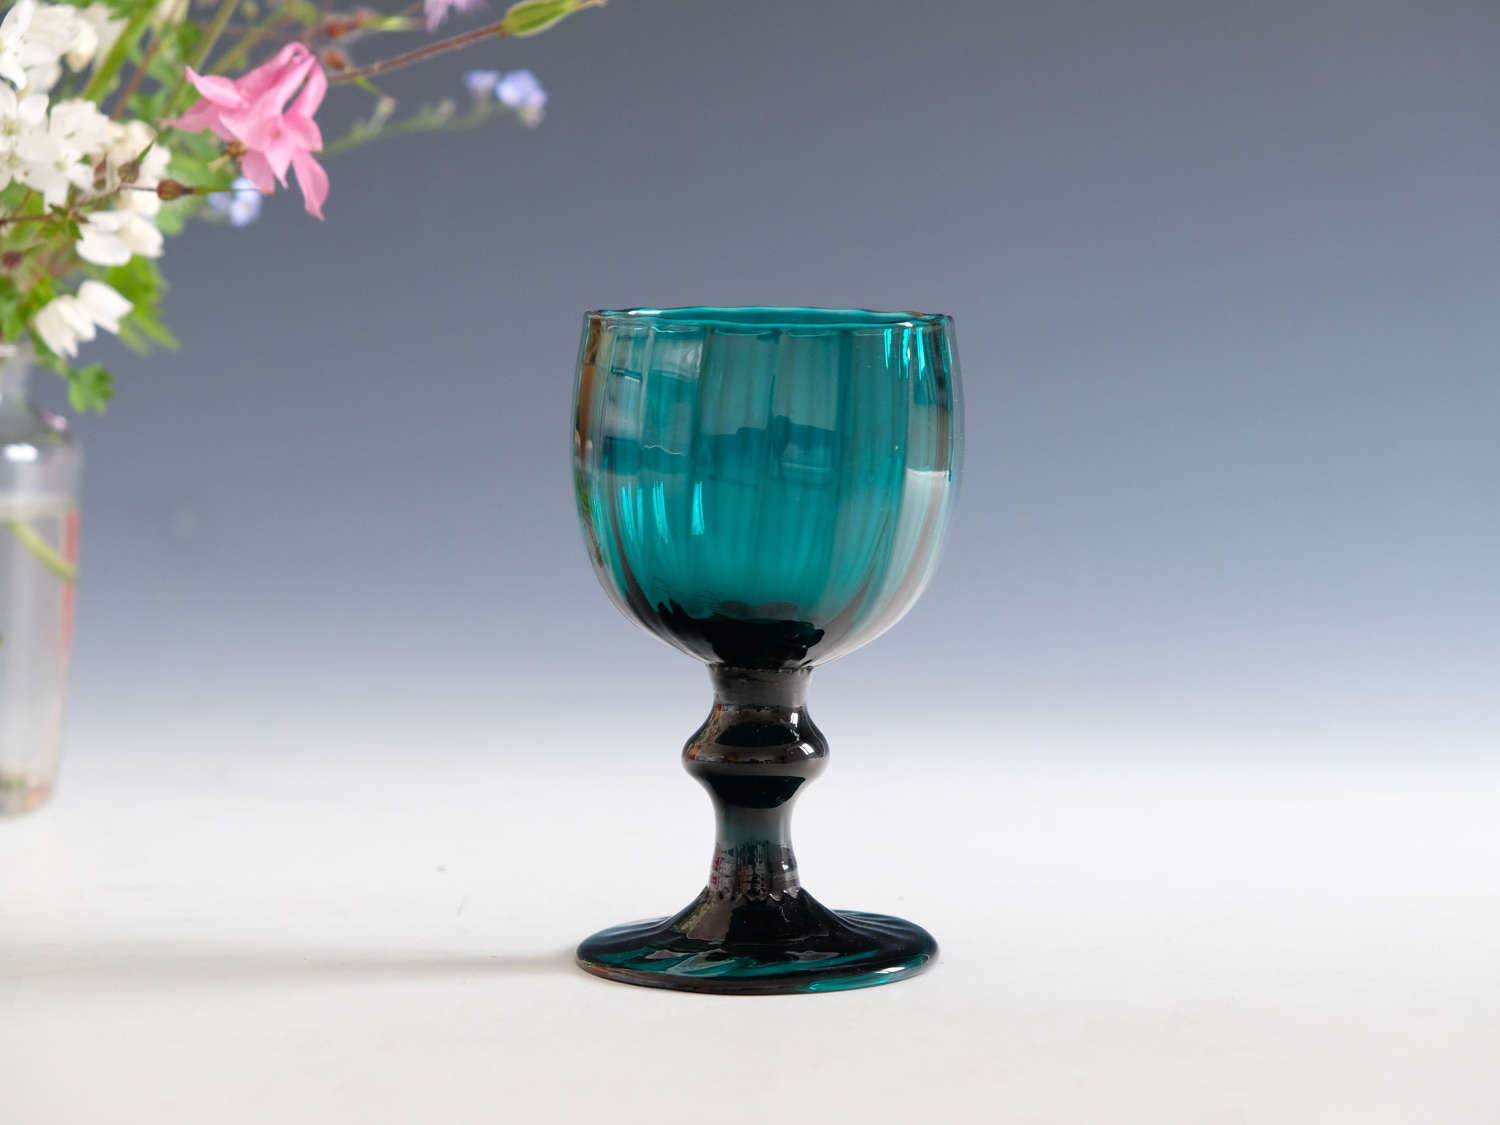 Antique glass - ribbed green wine glass English 1800